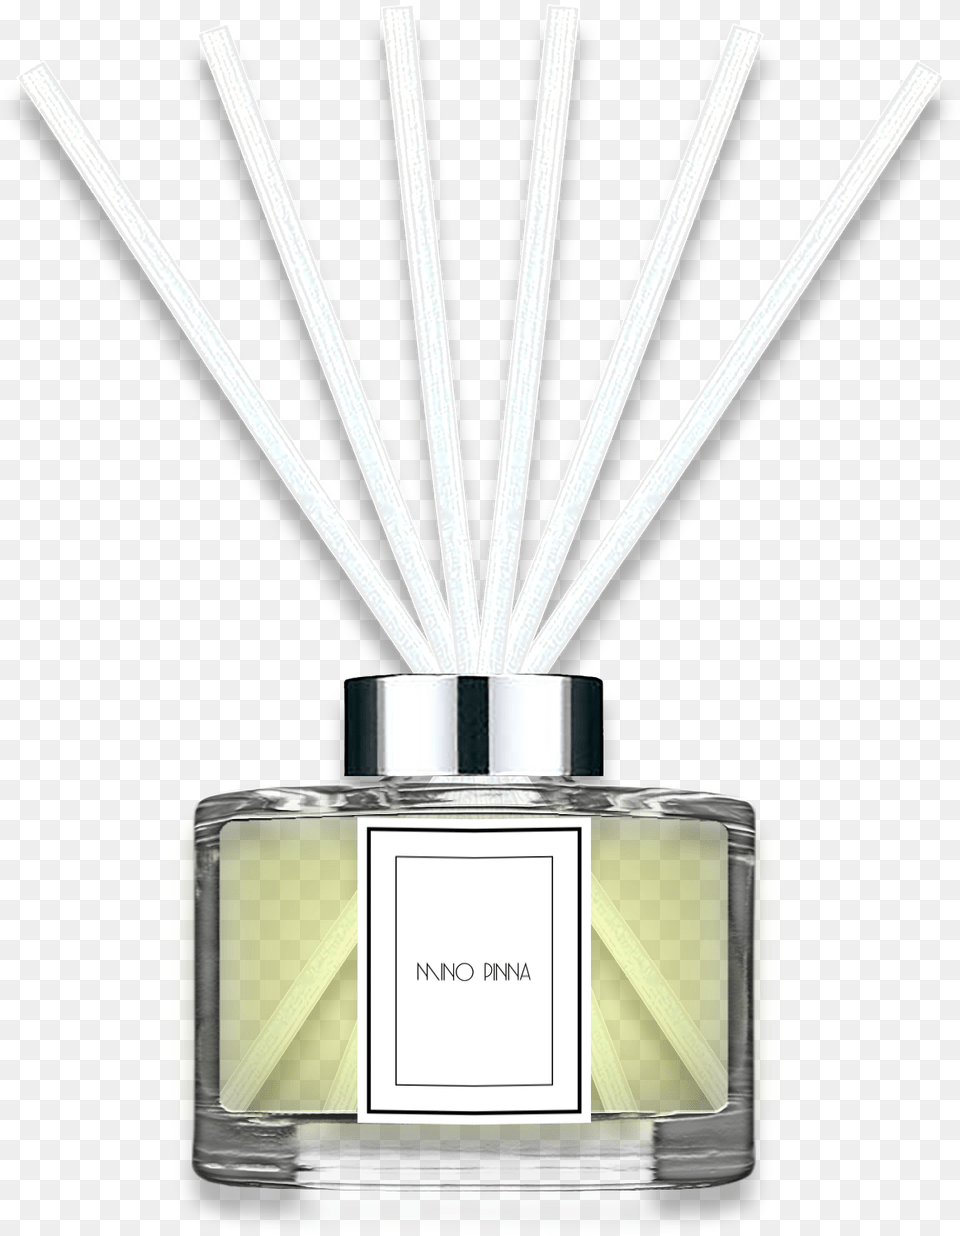 Sardegna Luxury Diffusers Makeup Mirror, Bottle, Cosmetics, Perfume, Blade Png